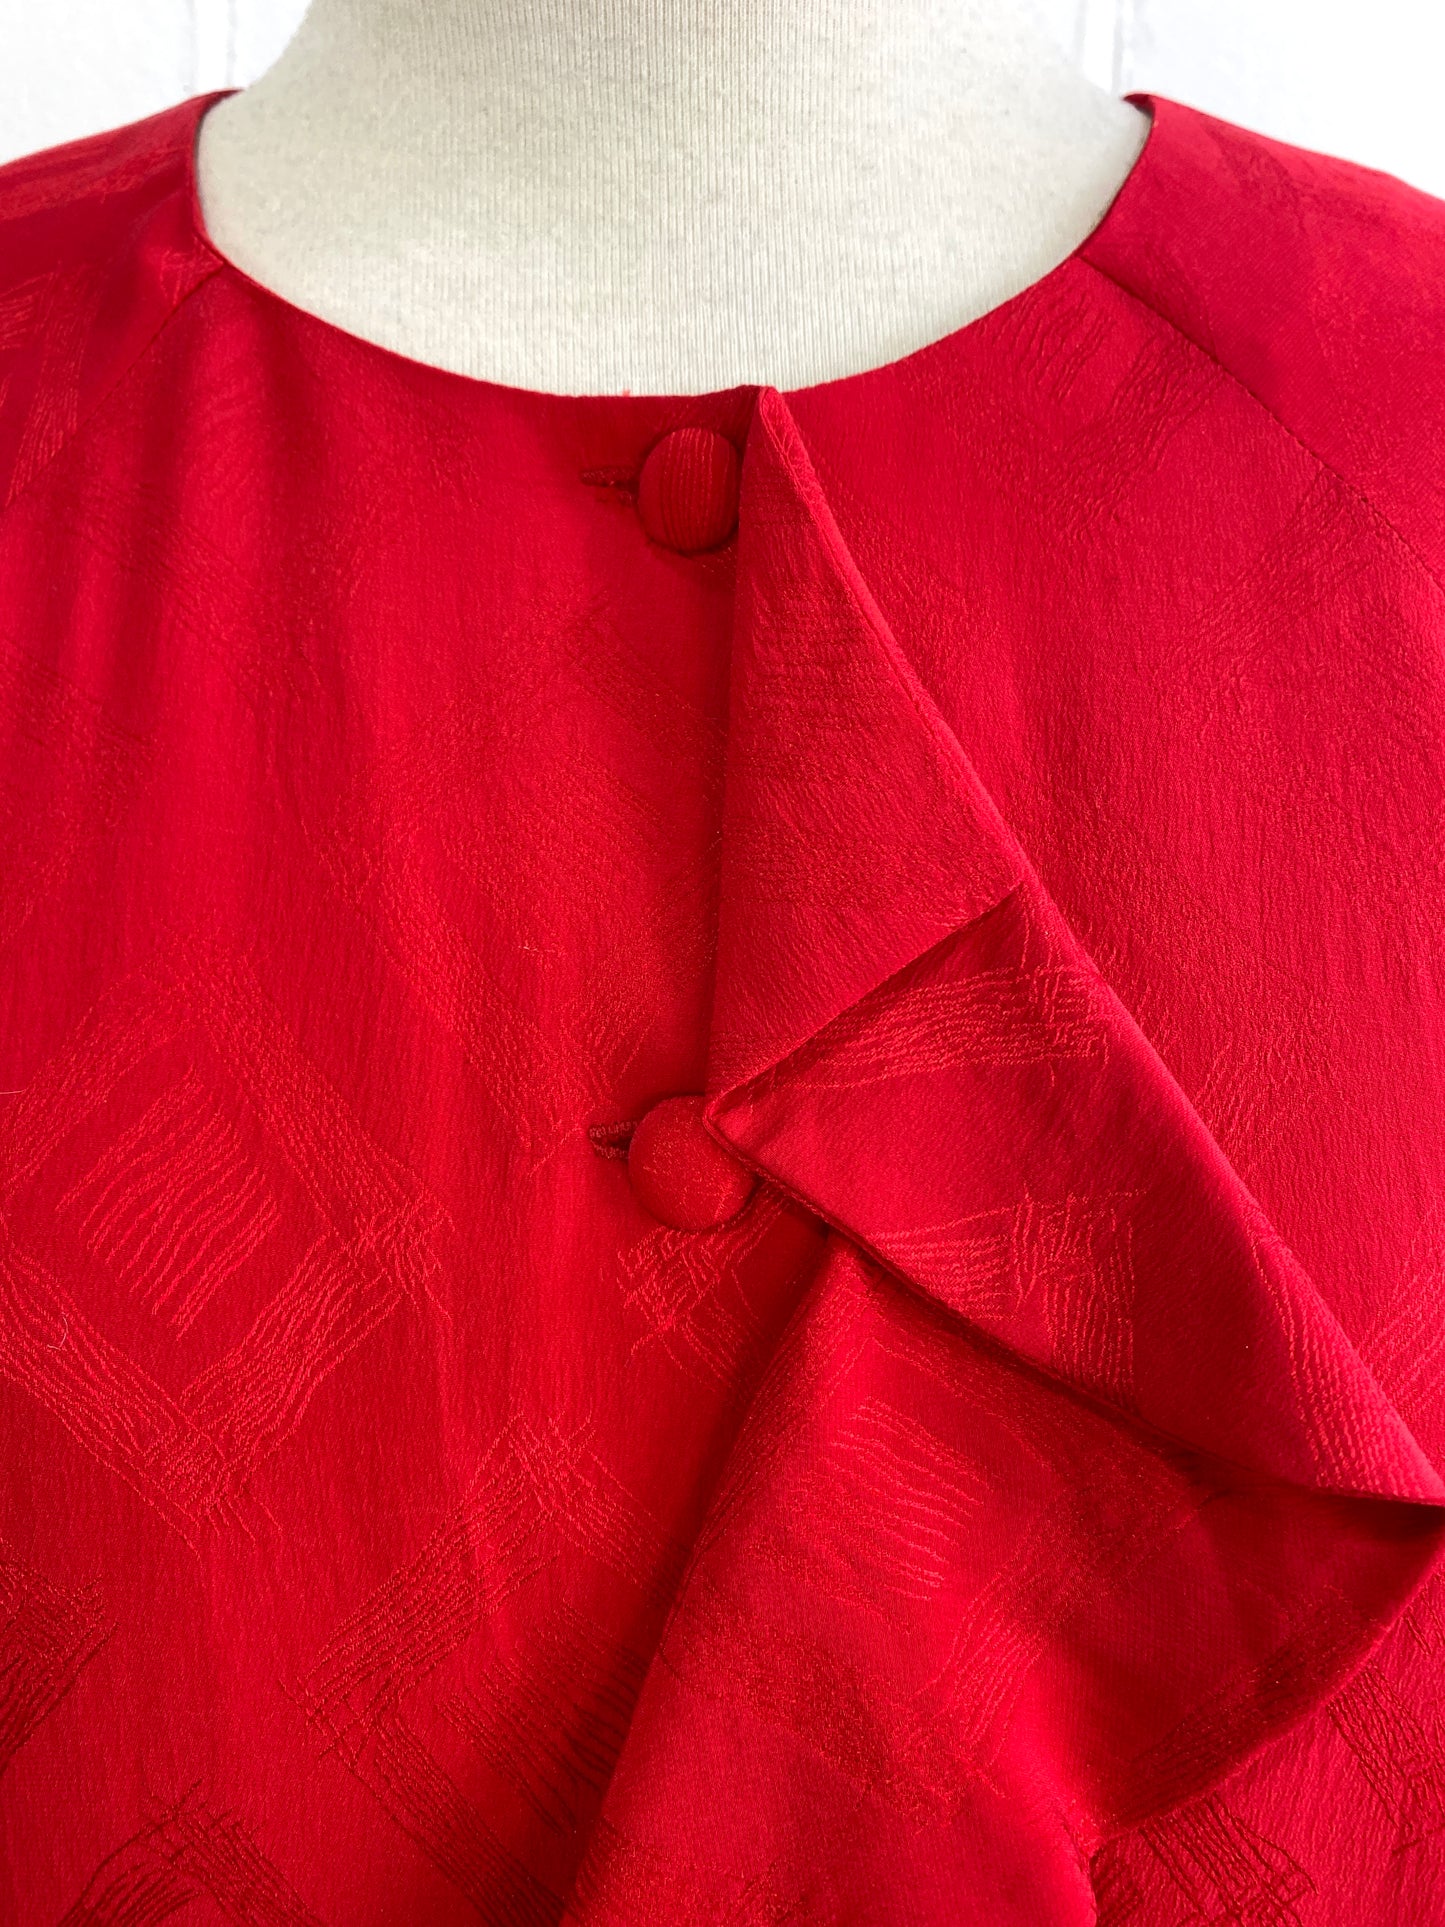 Vintage 1990s Red Silk Ruffle Blouse, x4 sizes